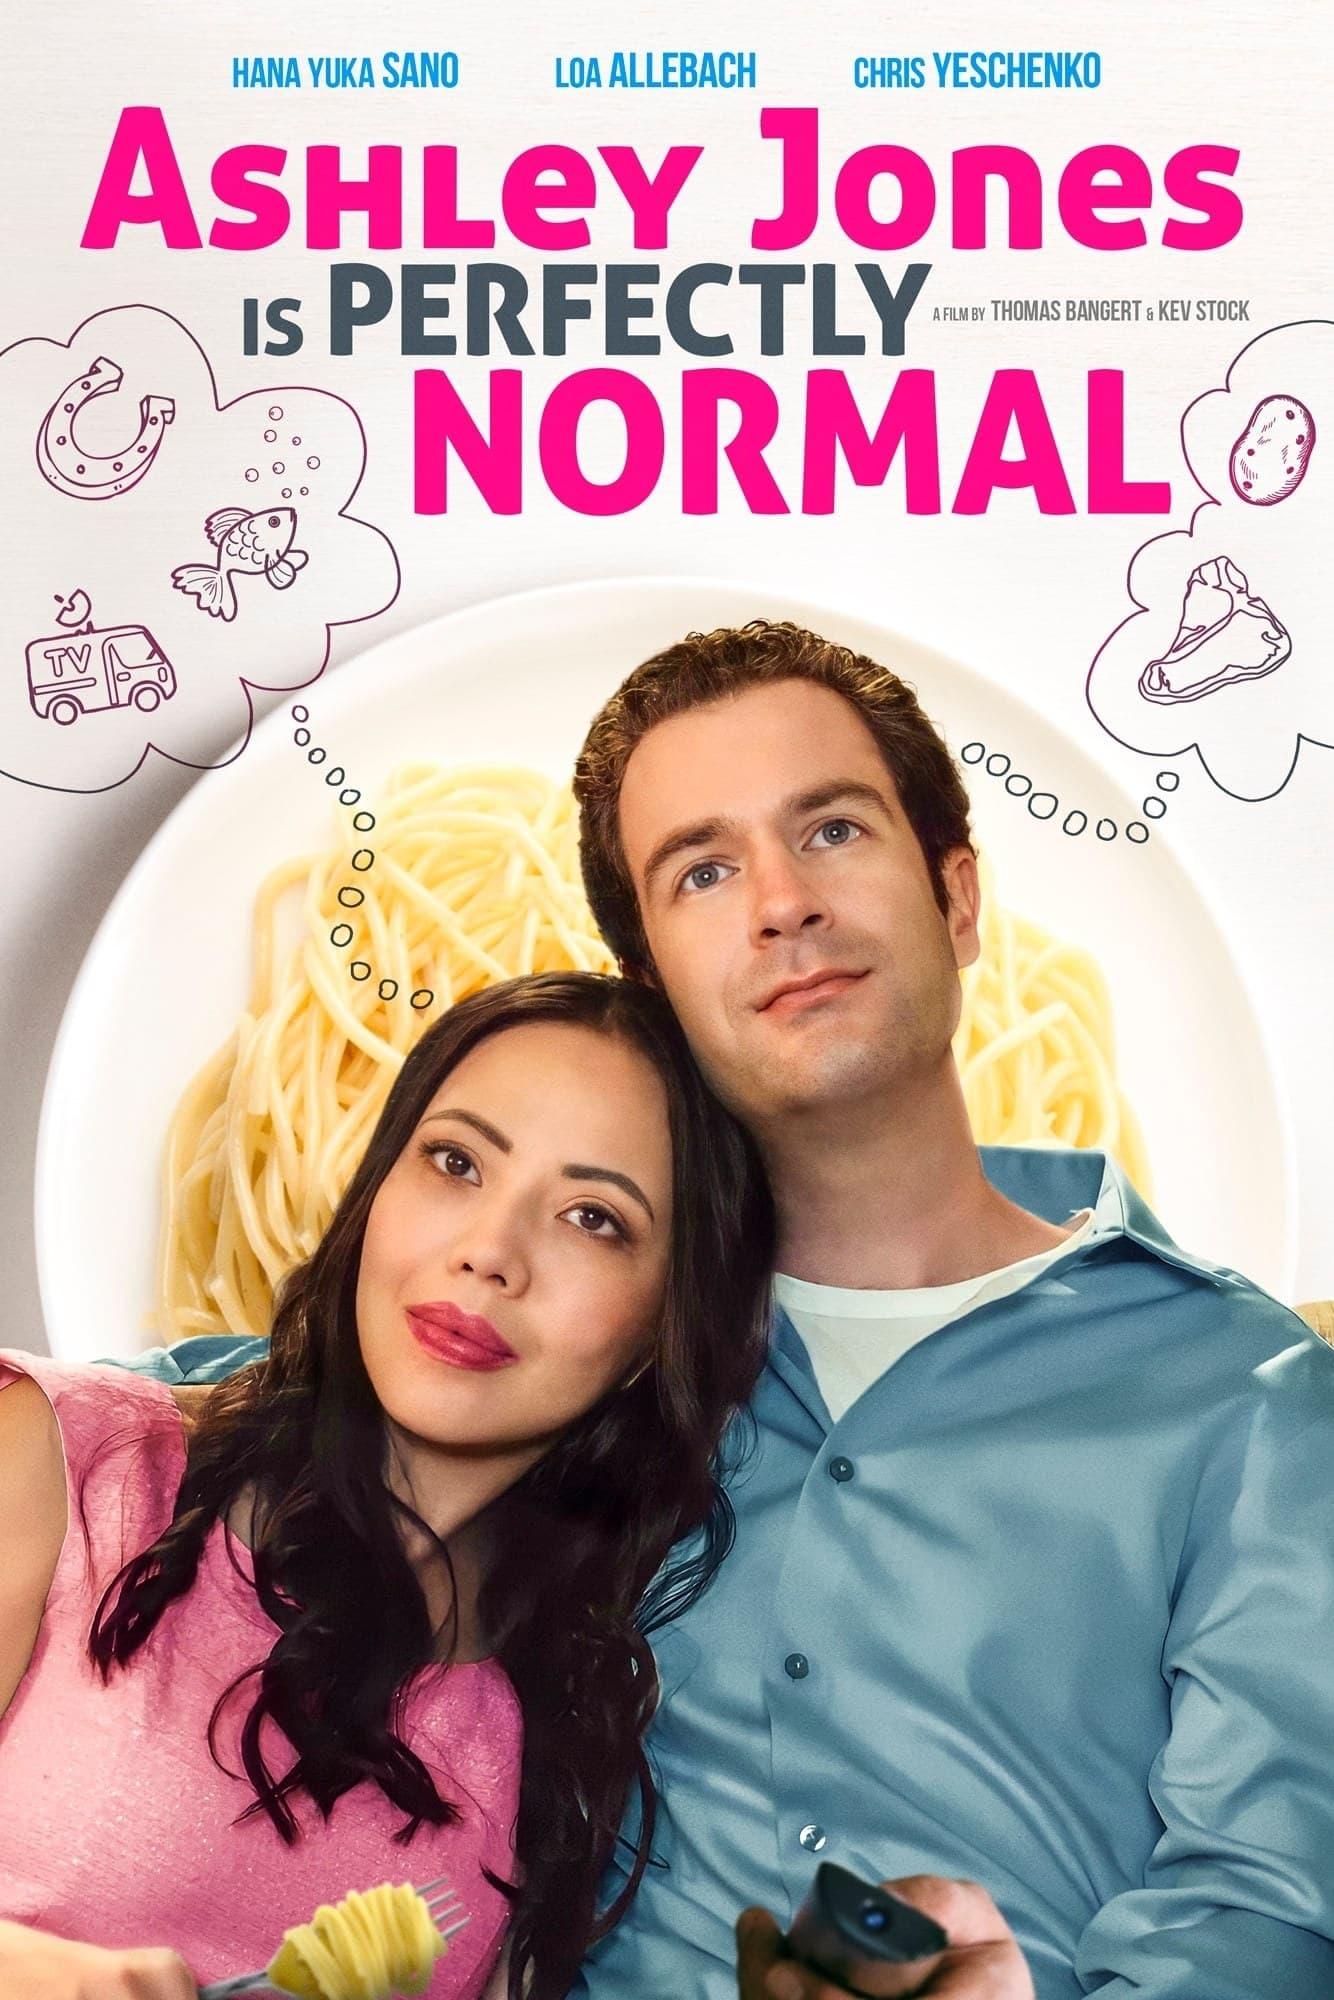 Ashley Jones Is Perfectly Normal poster